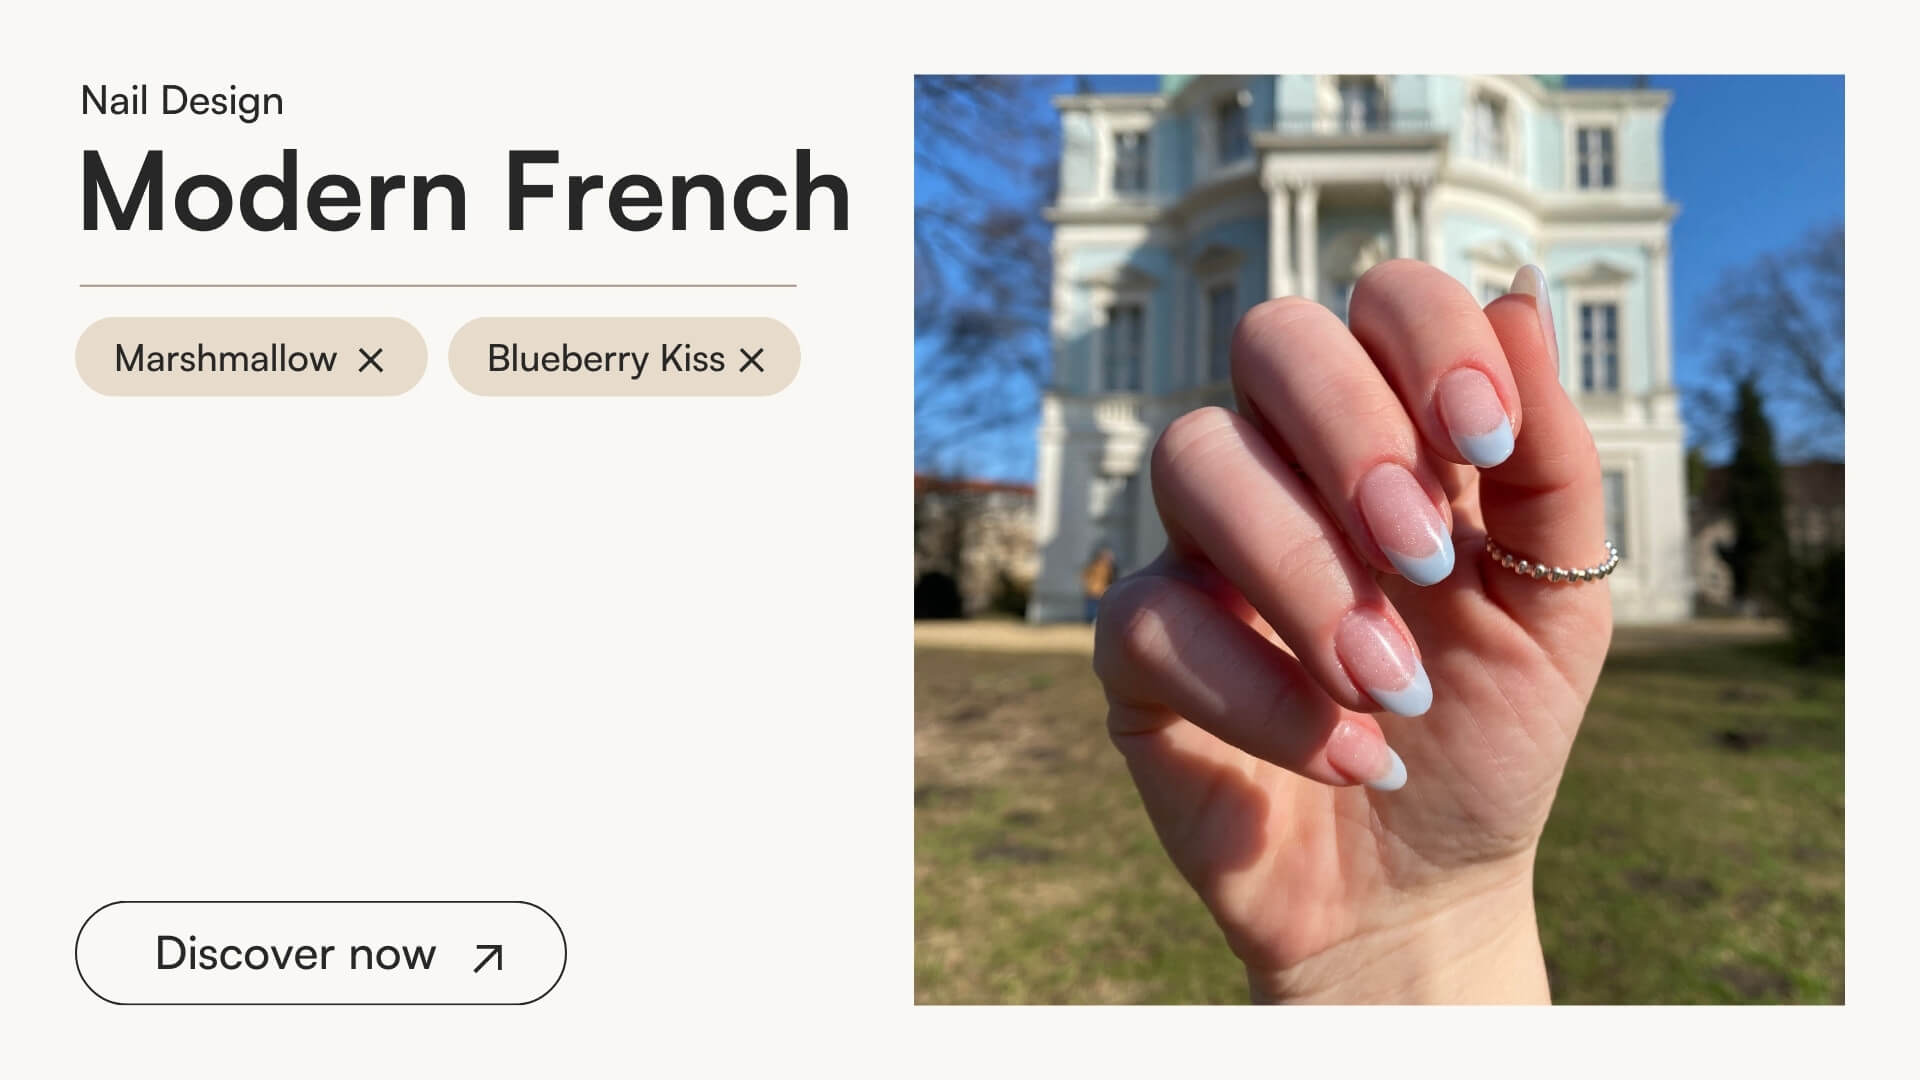 Modern French with Blueberry Kiss